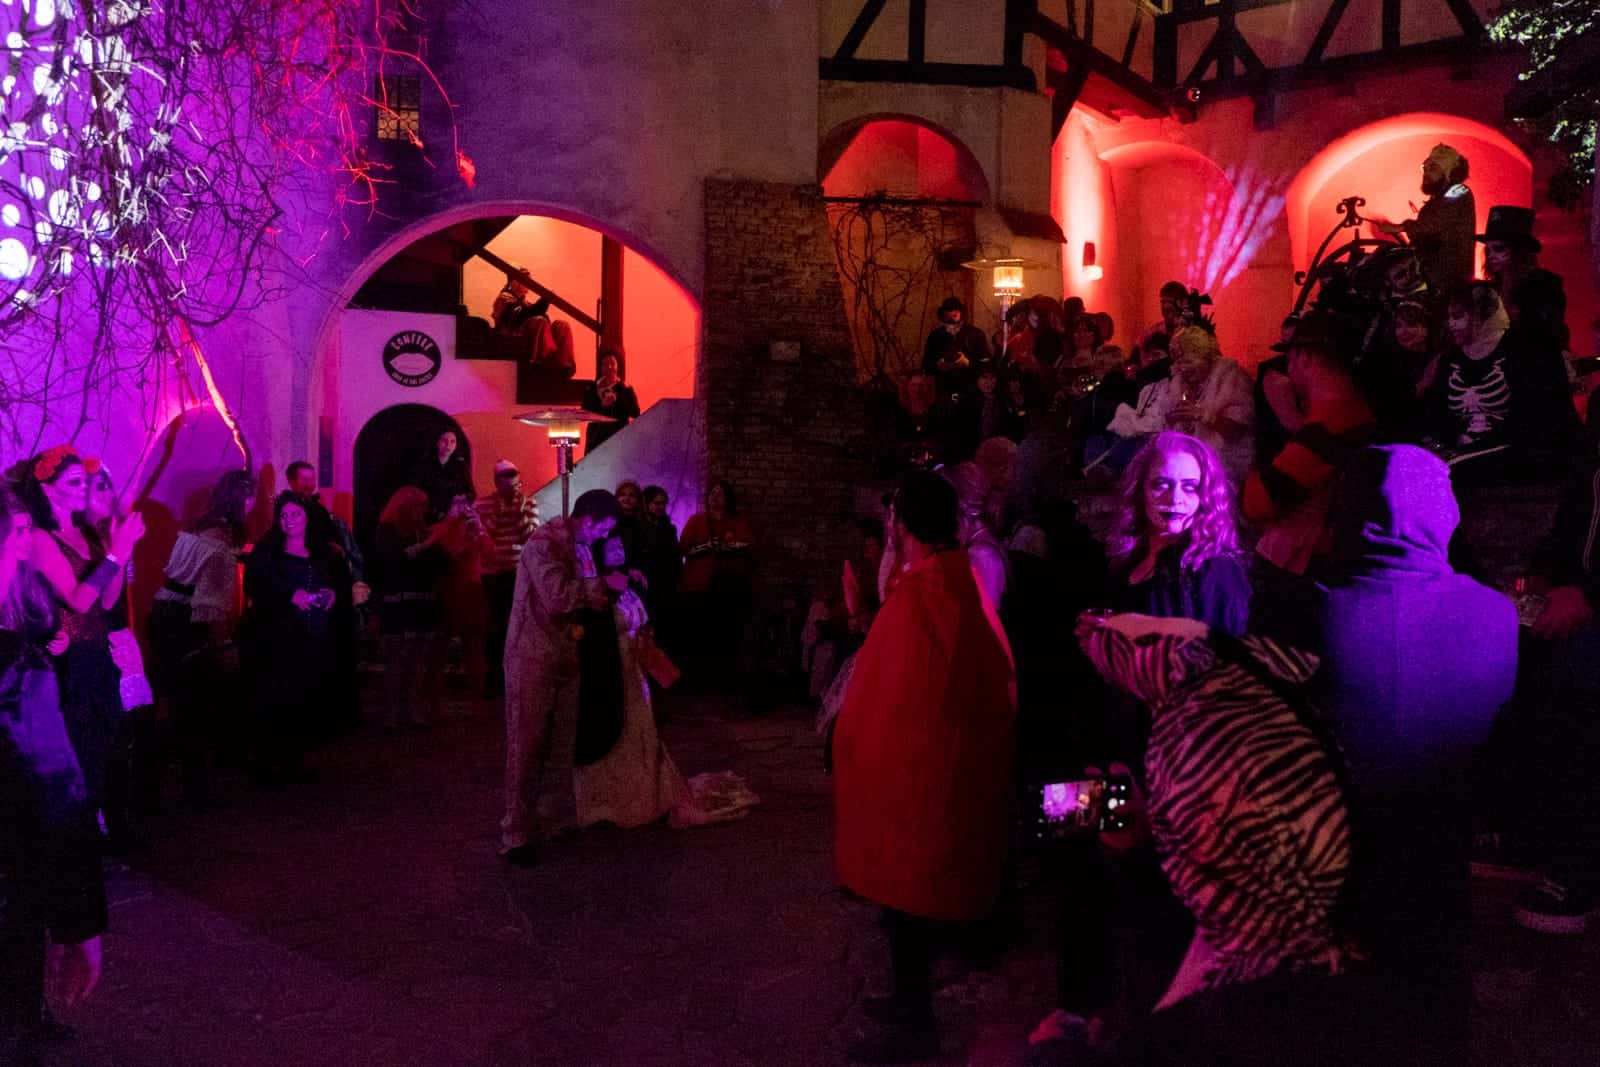 A group of people in costume at a Halloween party in Bran Castle, Transylvania, Romania